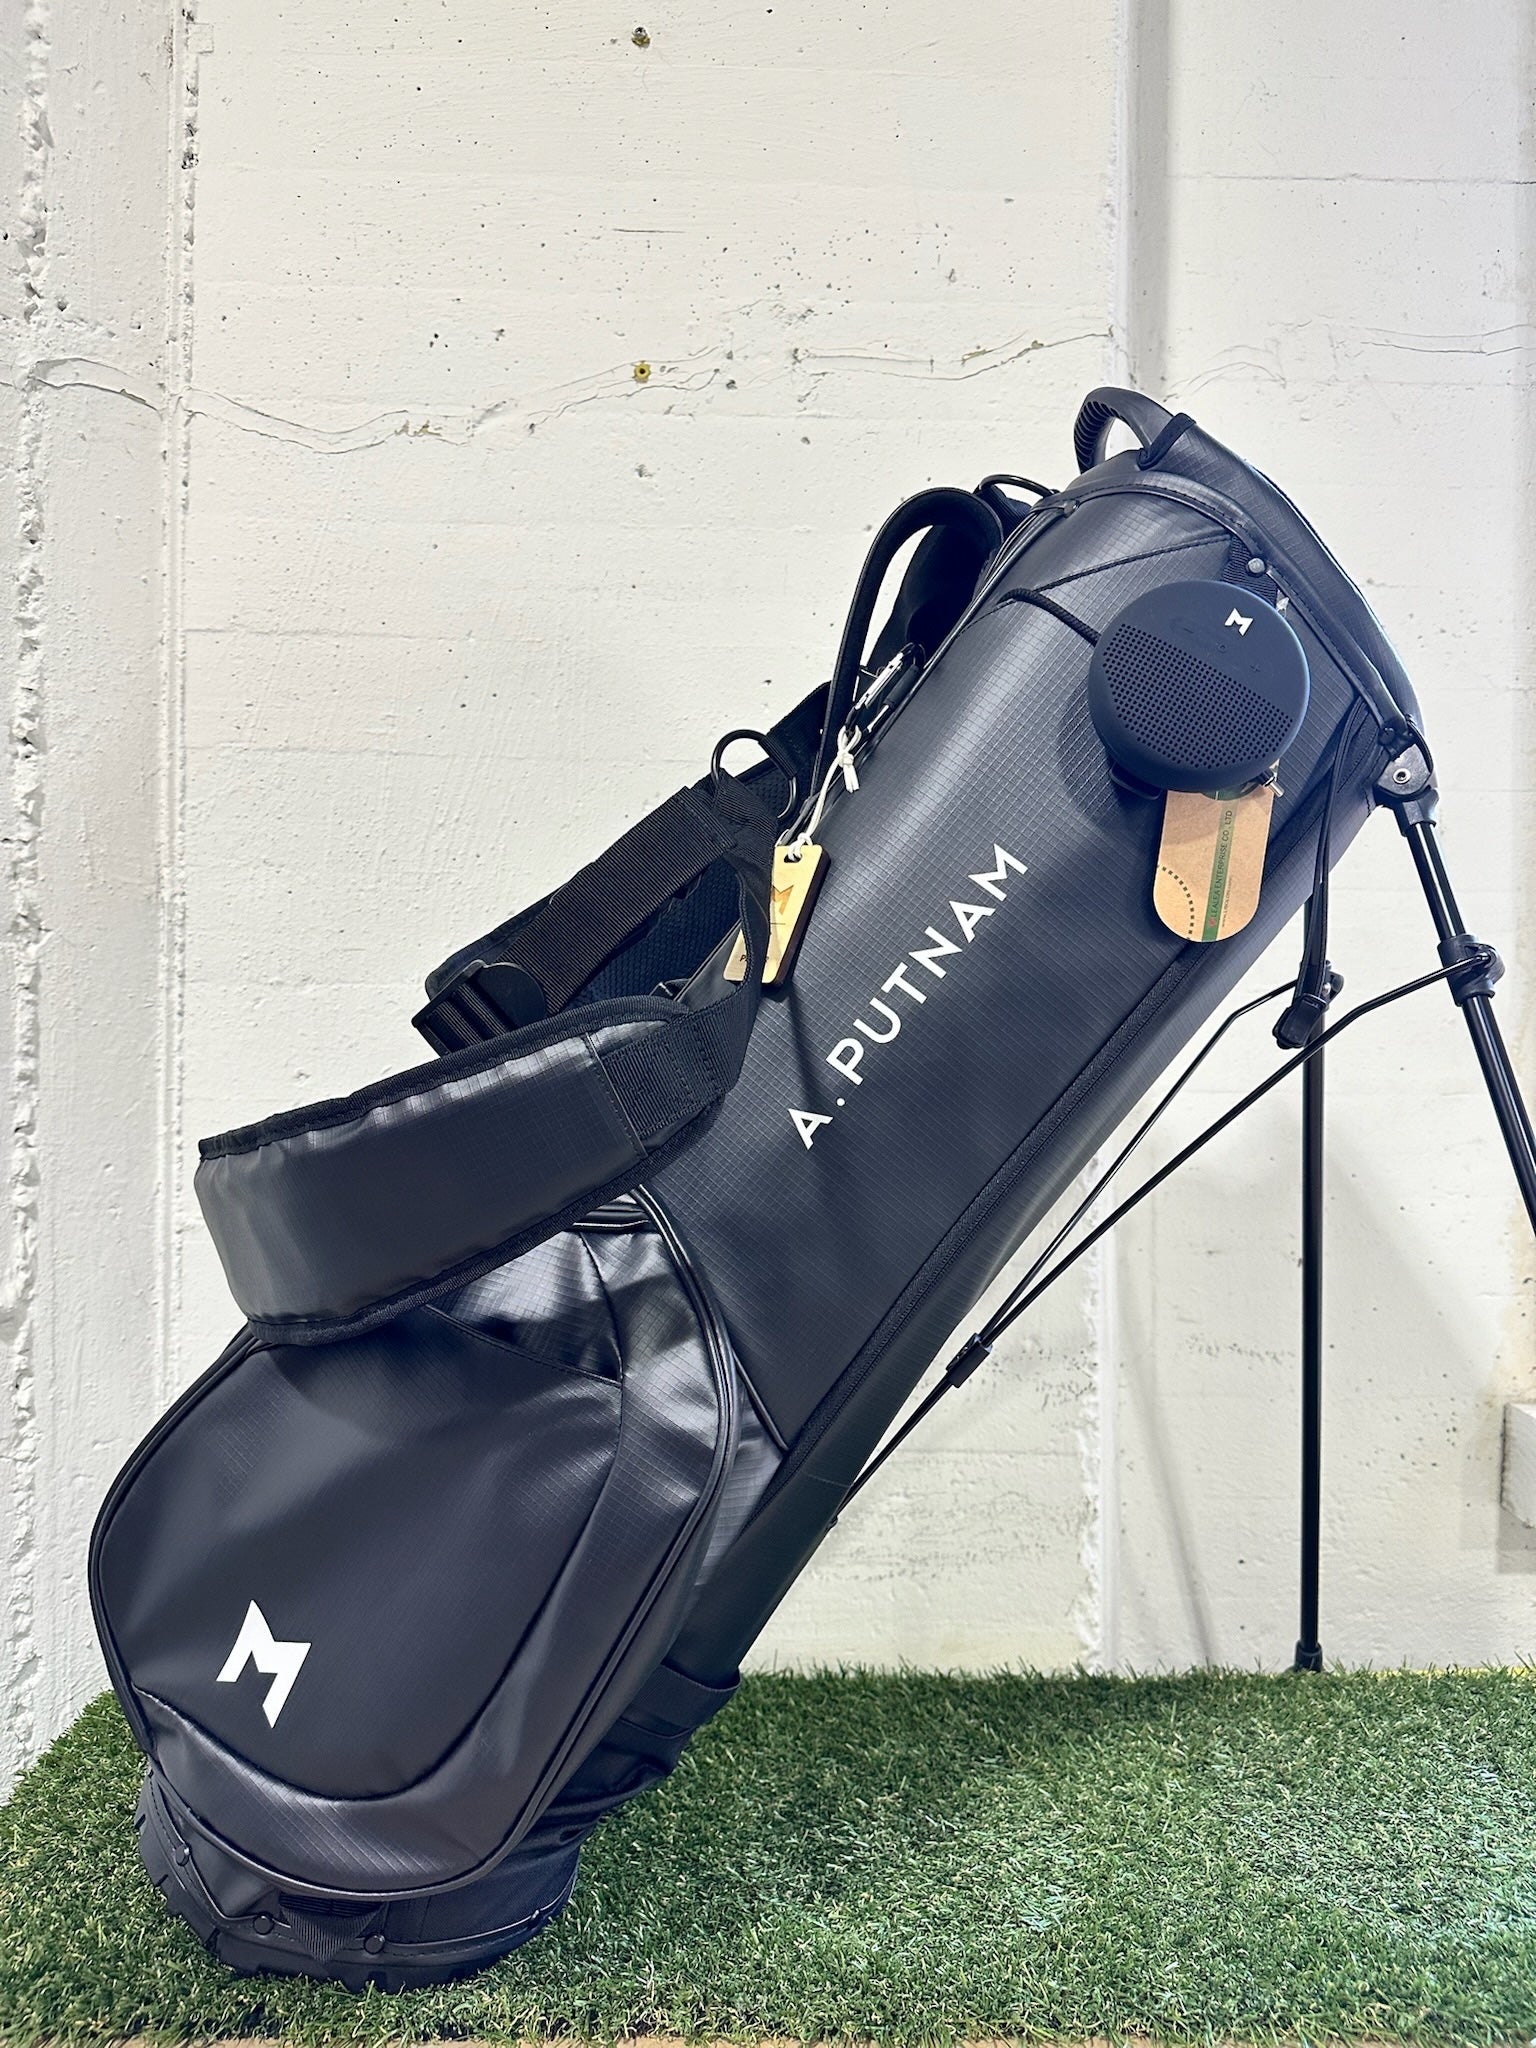 A. Putnam hand painted on the black MR1 eco friendly golf bag, by MNML GOLF. 